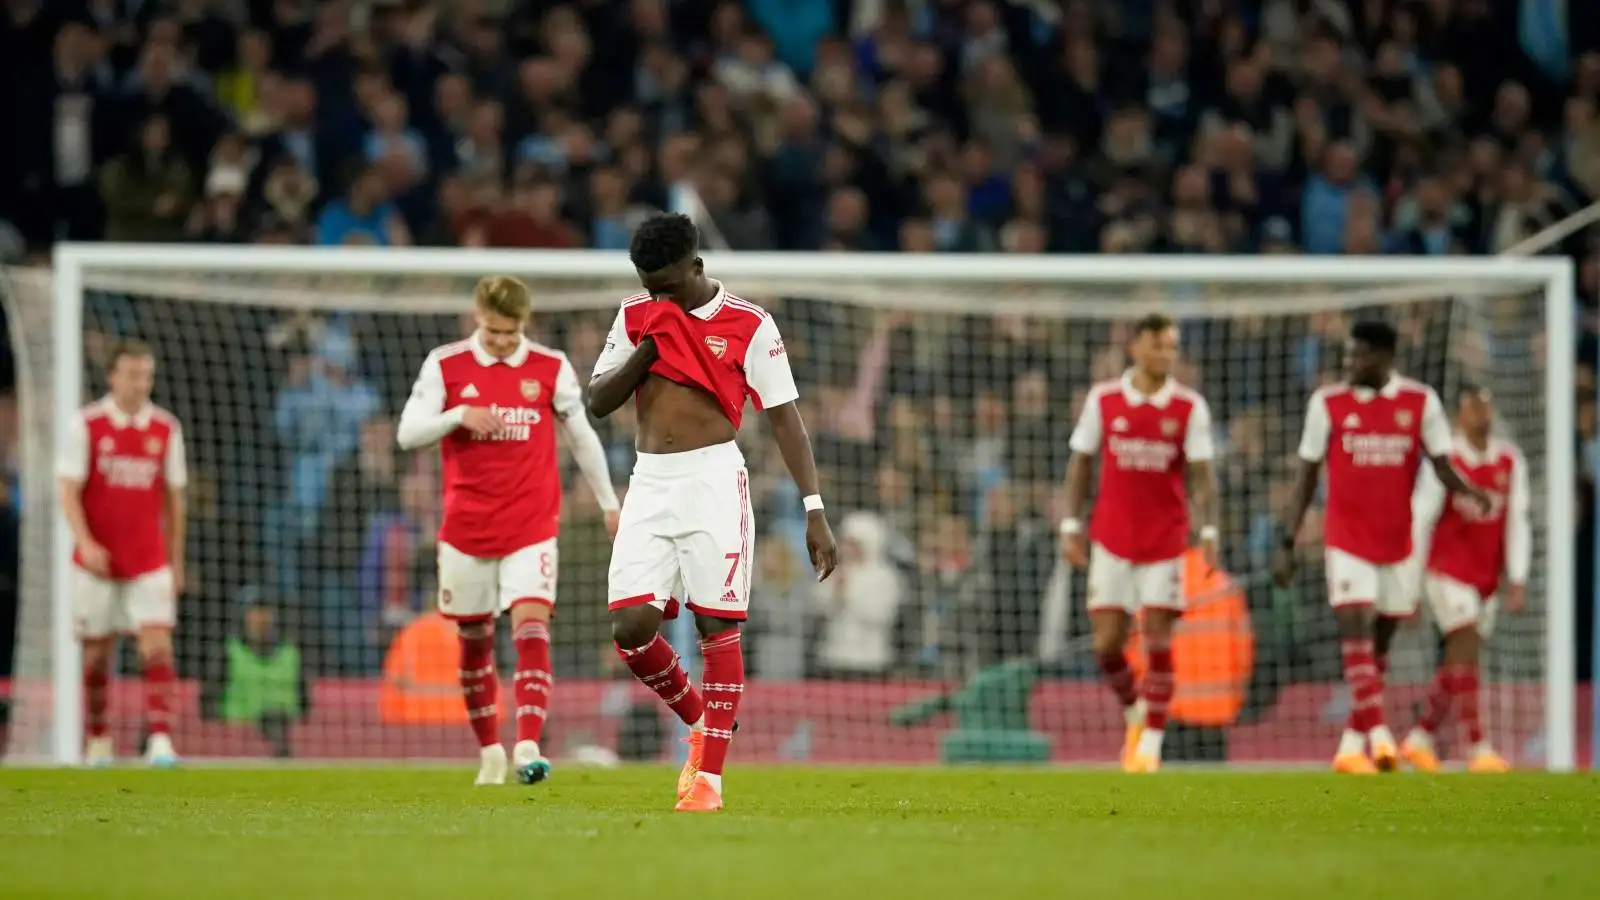 Arsenal players look dejected after conceding a goal